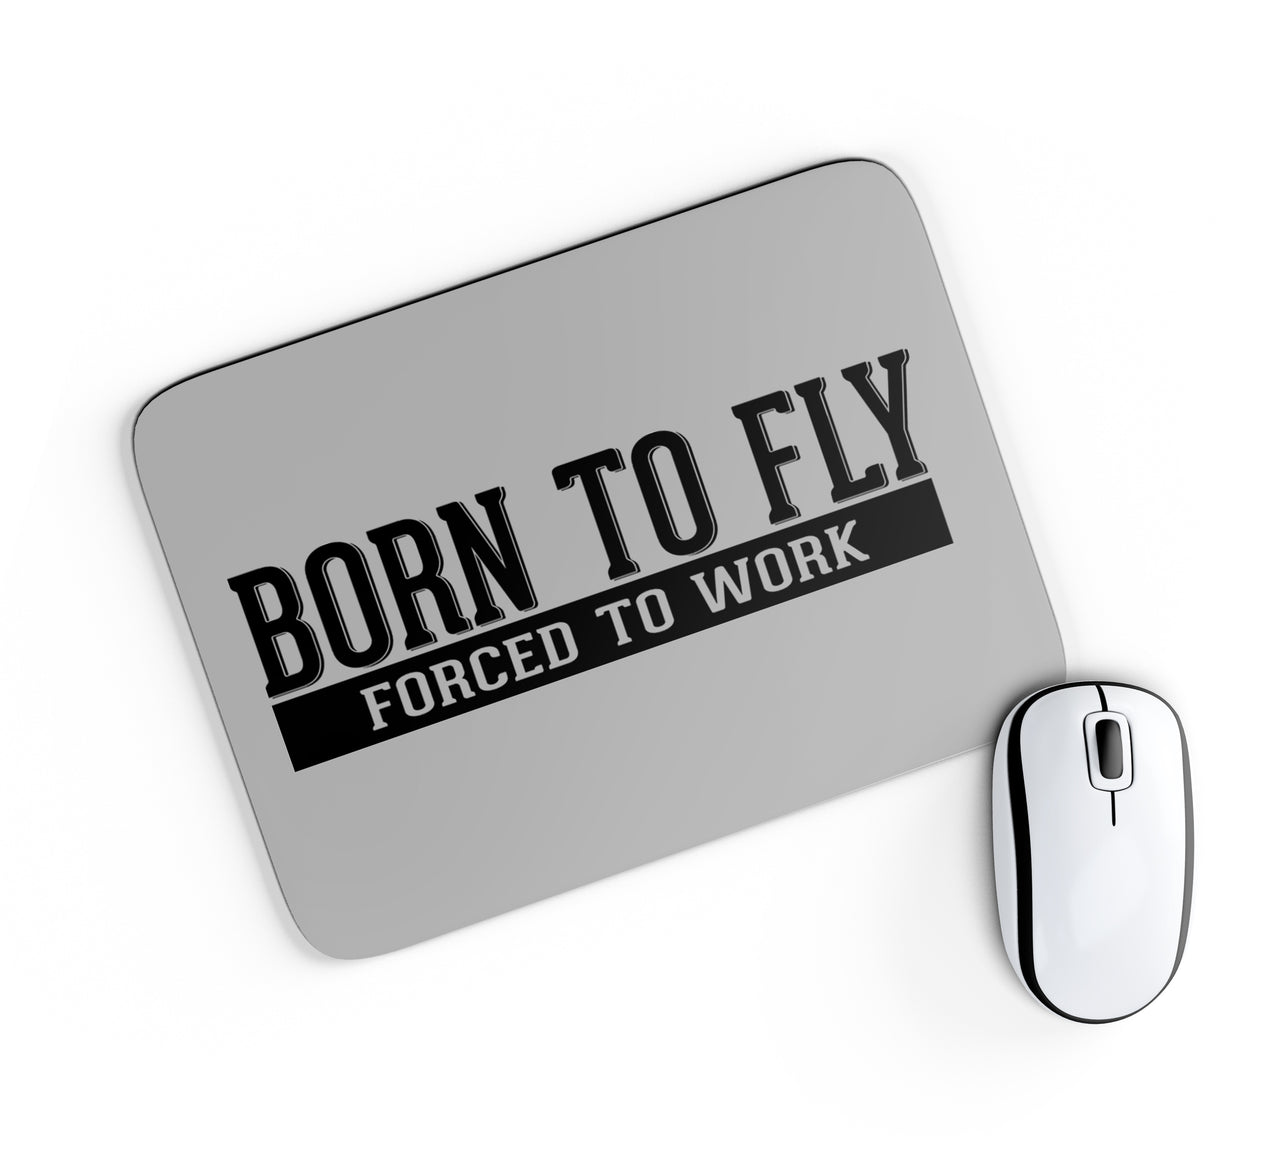 Born To Fly Forced To Work Designed Mouse Pads